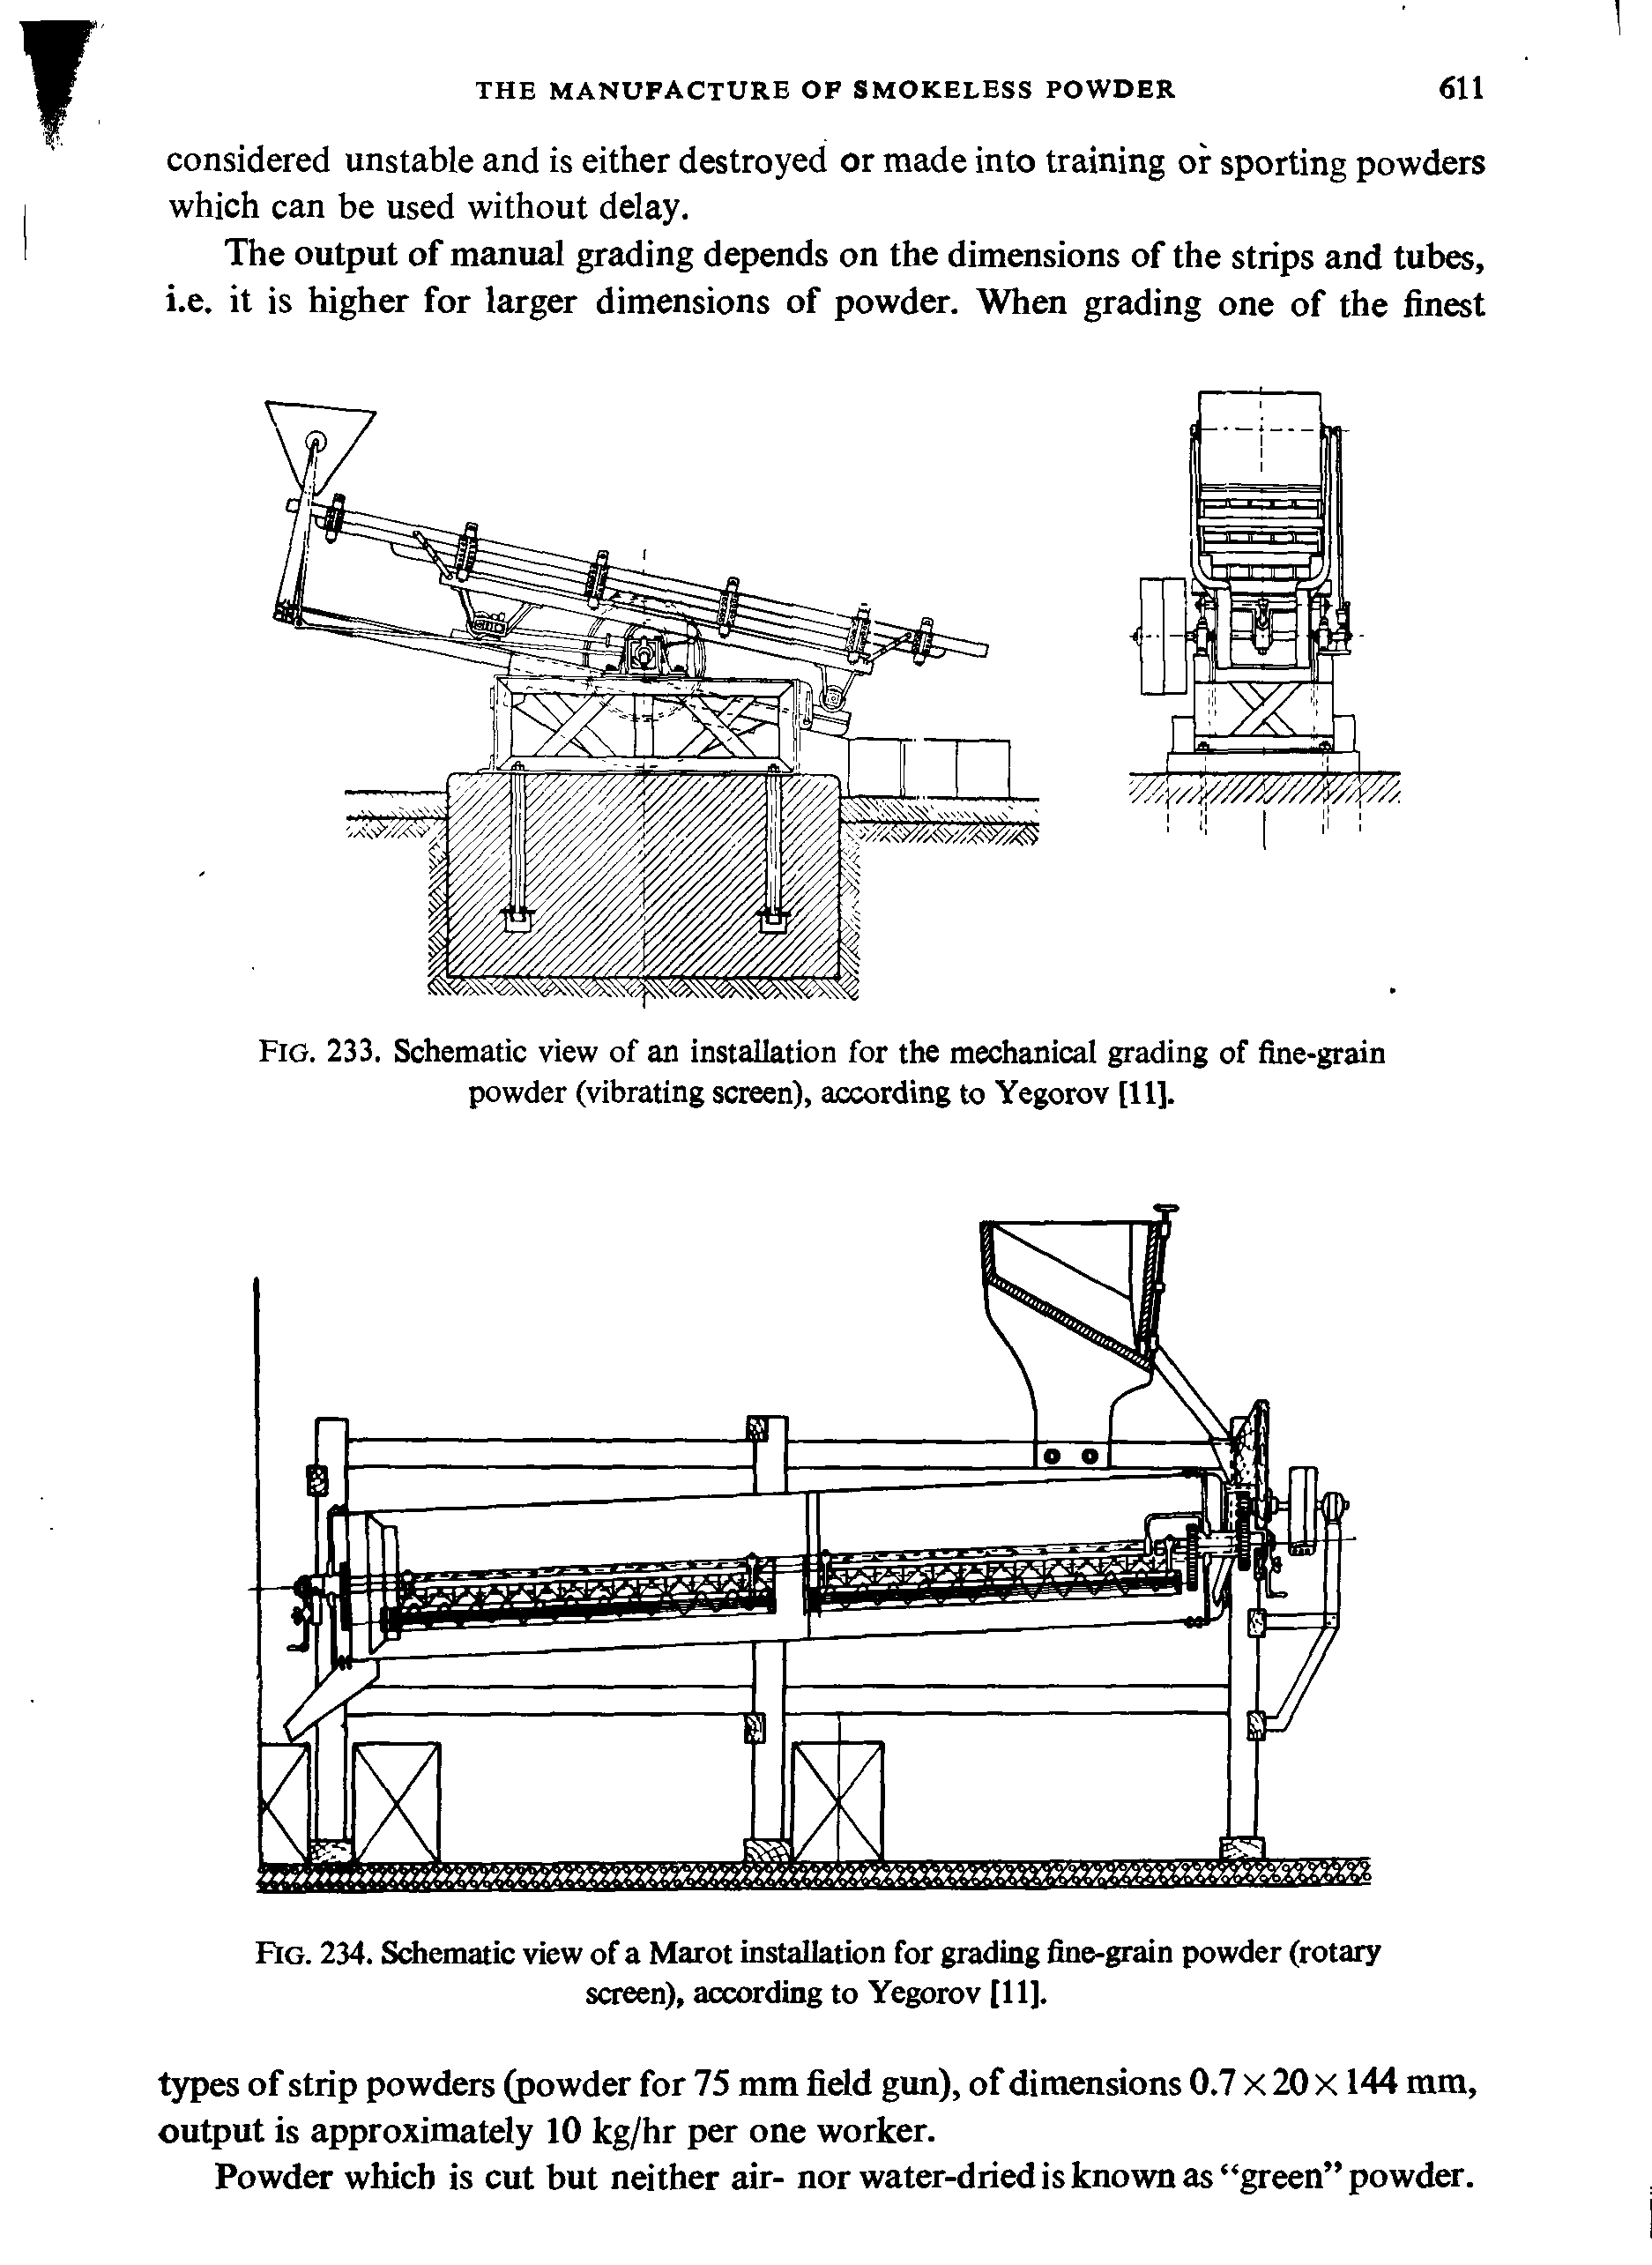 Fig. 233. Schematic view of an installation for the mechanical grading of fine-grain powder (vibrating screen), according to Yegorov [11].